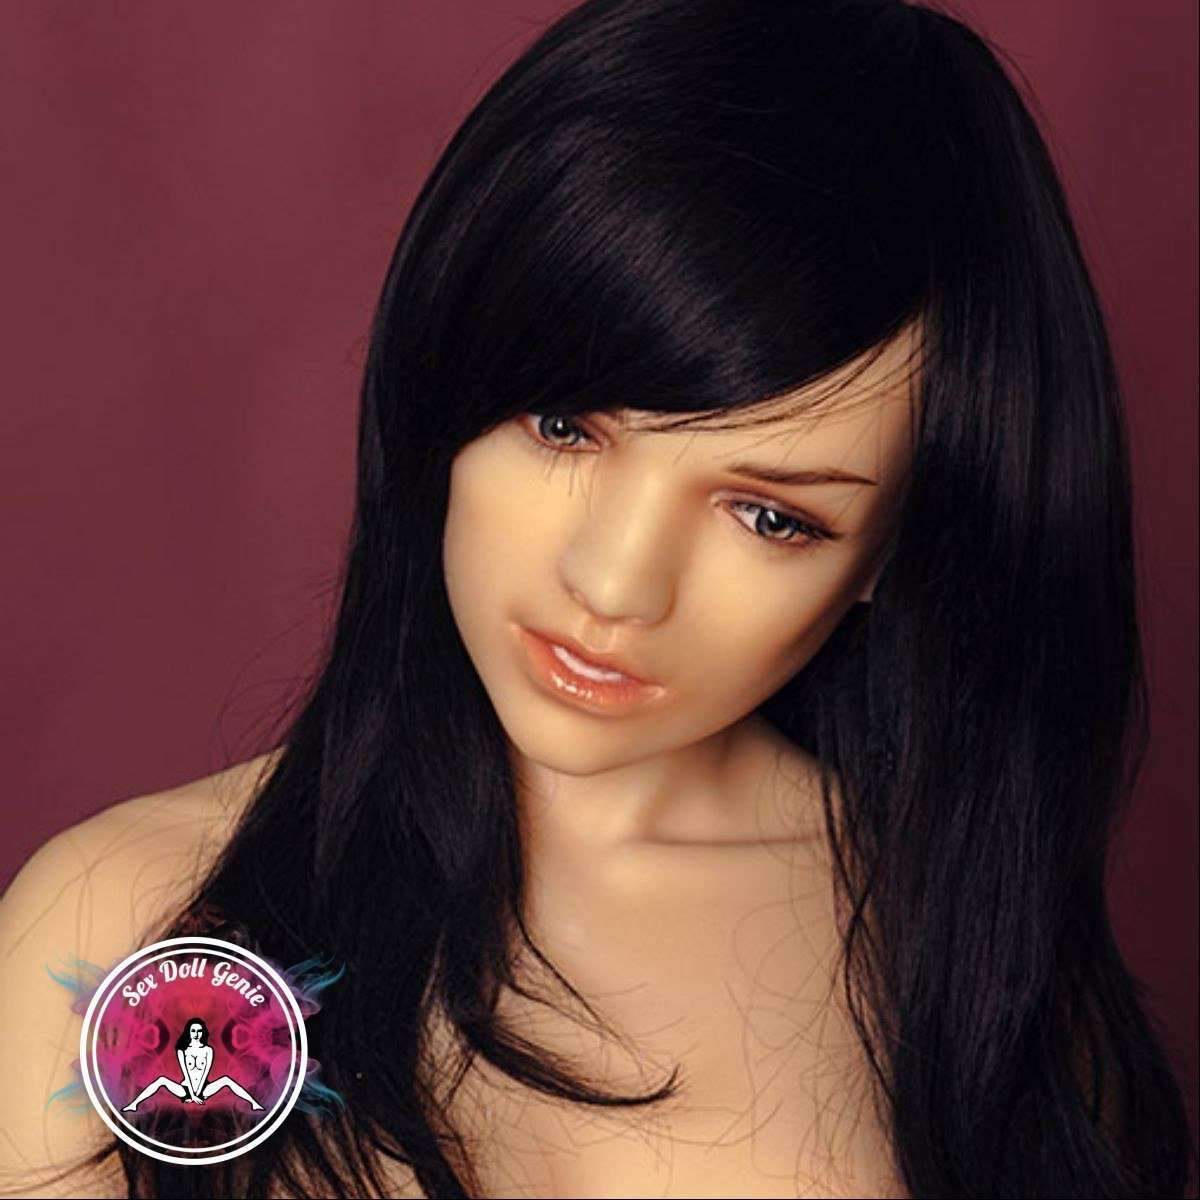 DS Doll - 163 - Mandy Head - Type 1 D Cup Silicone Doll-3